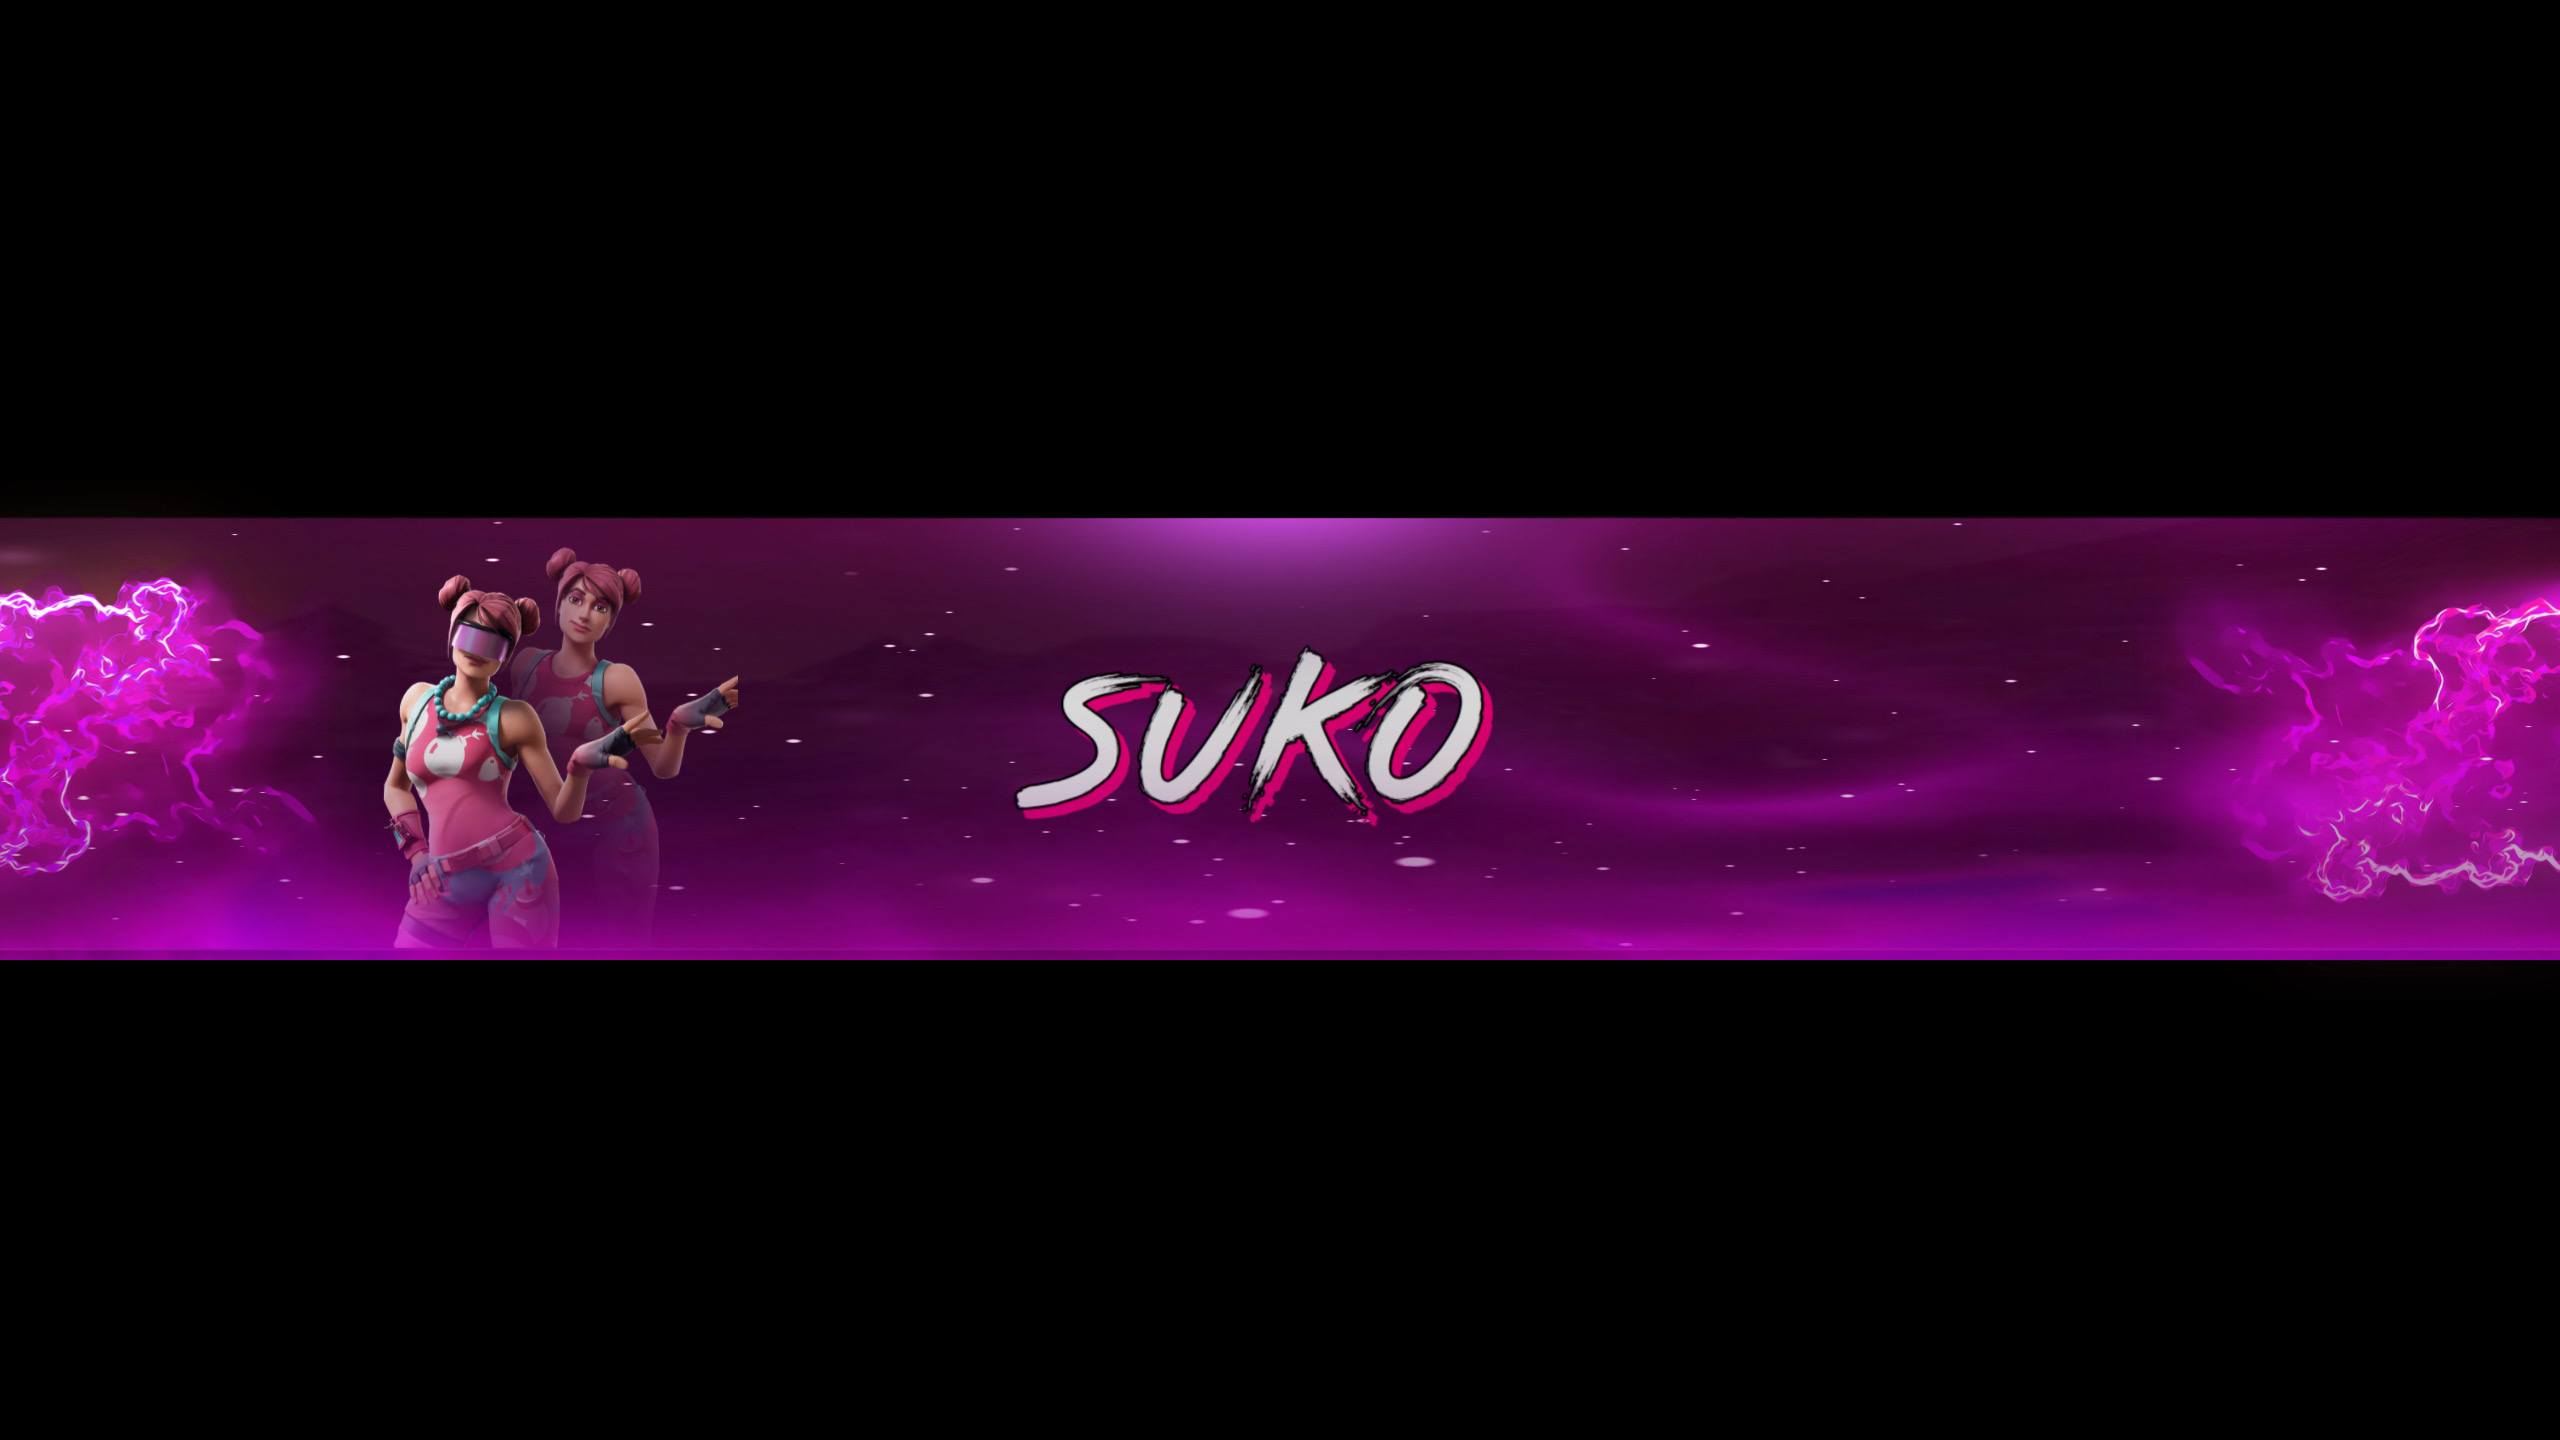 Fortnite Banner Youtube Gfx Image By Tannergfx